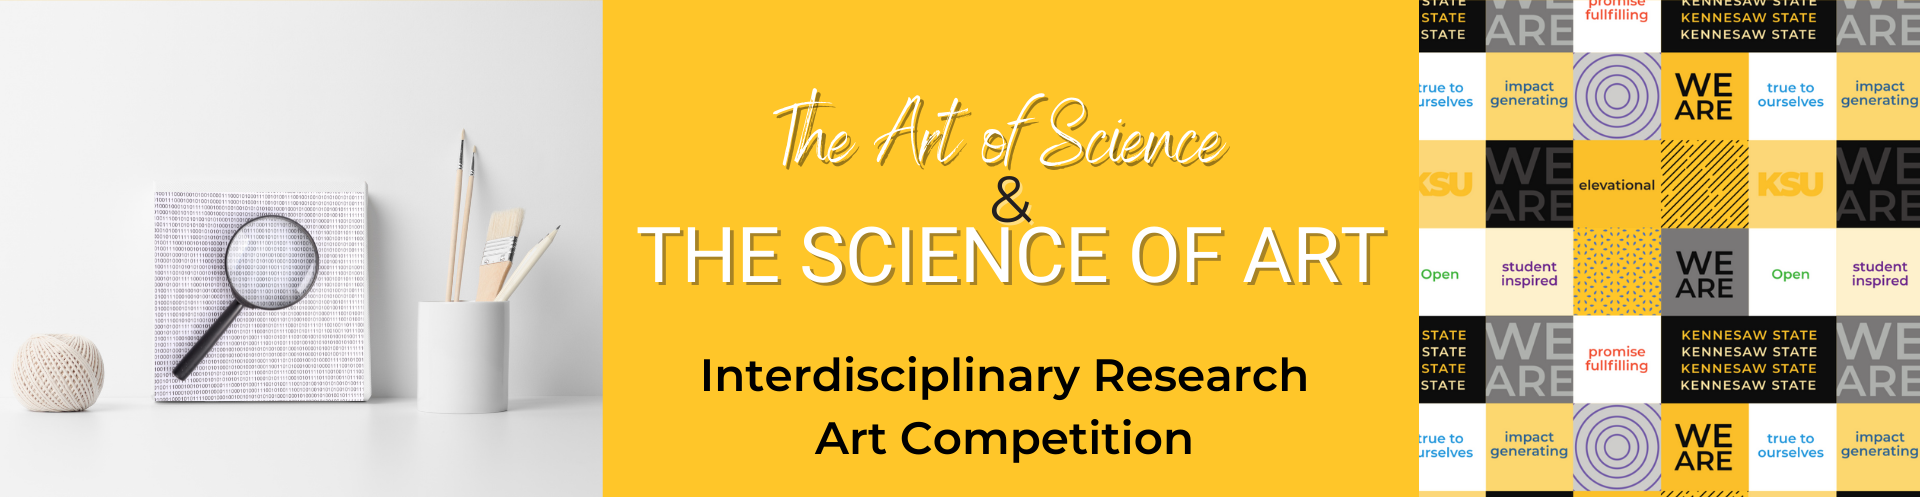 Interdisciplinary Research Art Competition